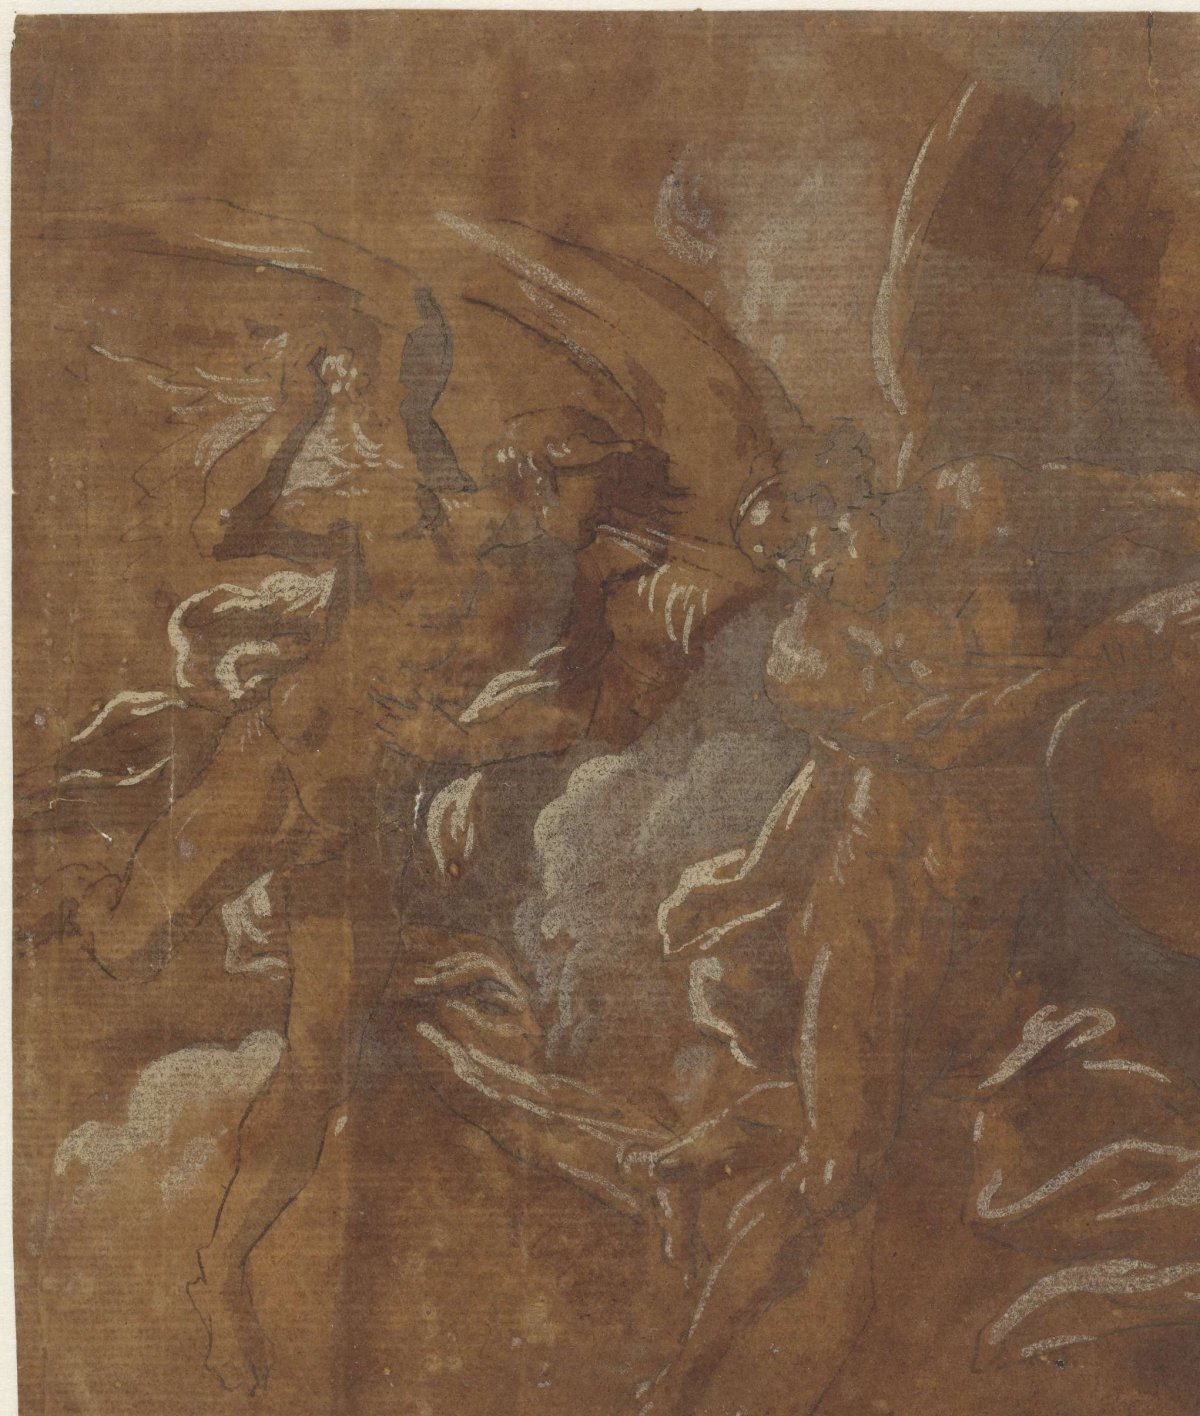 Two winged men, A. Carracci, 1570 - 1609